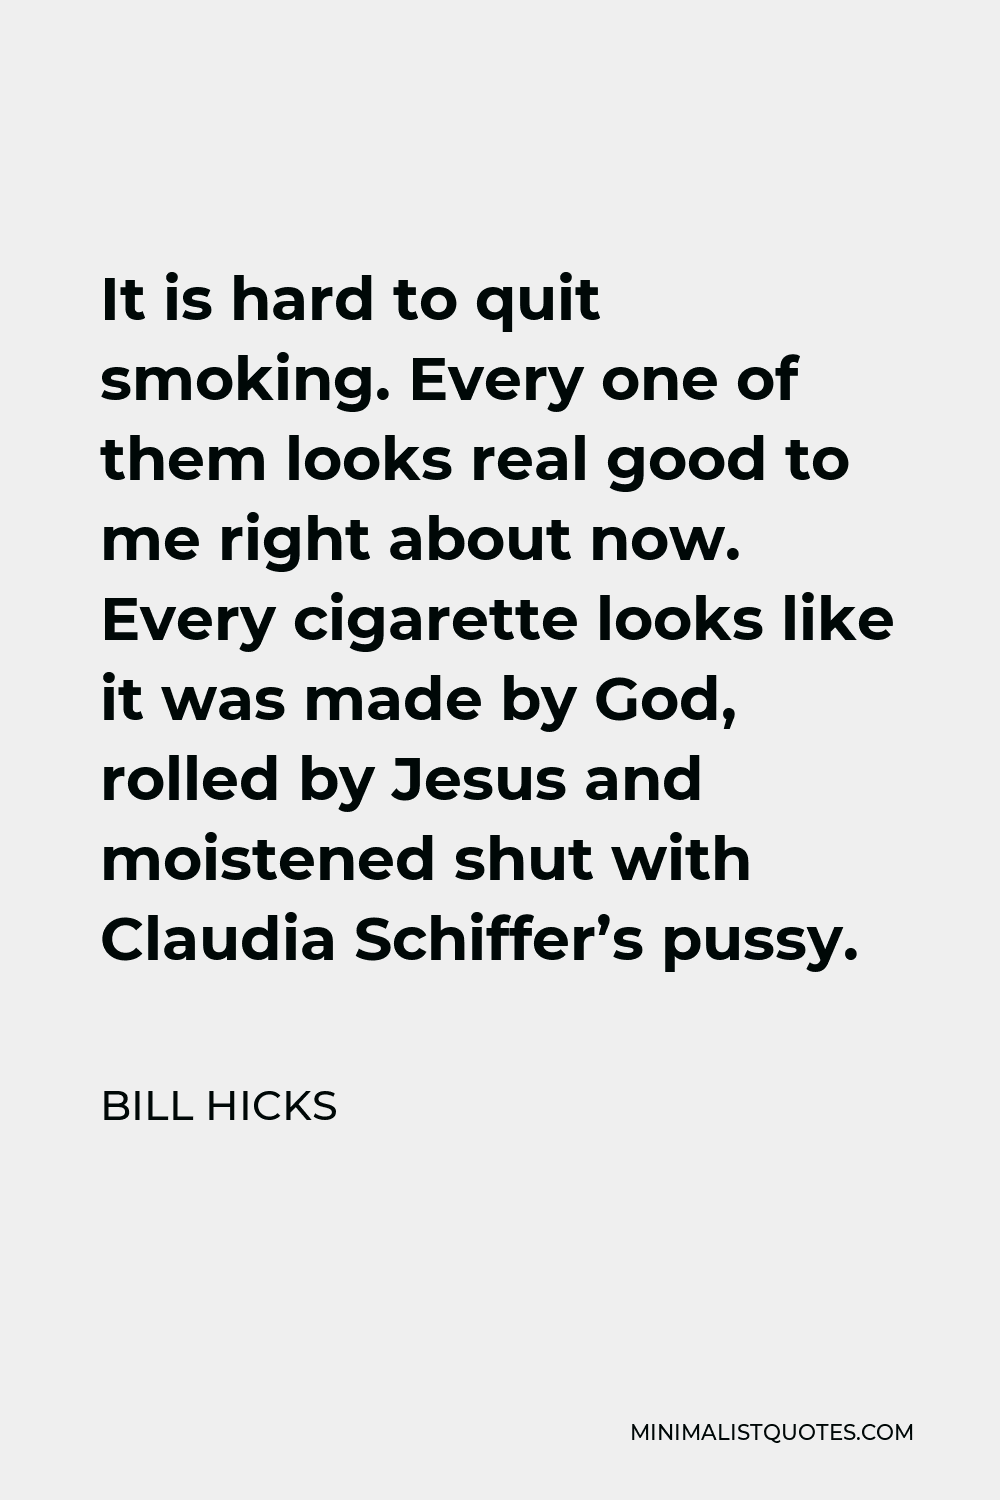 Bill Hicks Quote - It is hard to quit smoking. Every one of them looks real good to me right about now. Every cigarette looks like it was made by God, rolled by Jesus and moistened shut with Claudia Schiffer’s pussy.